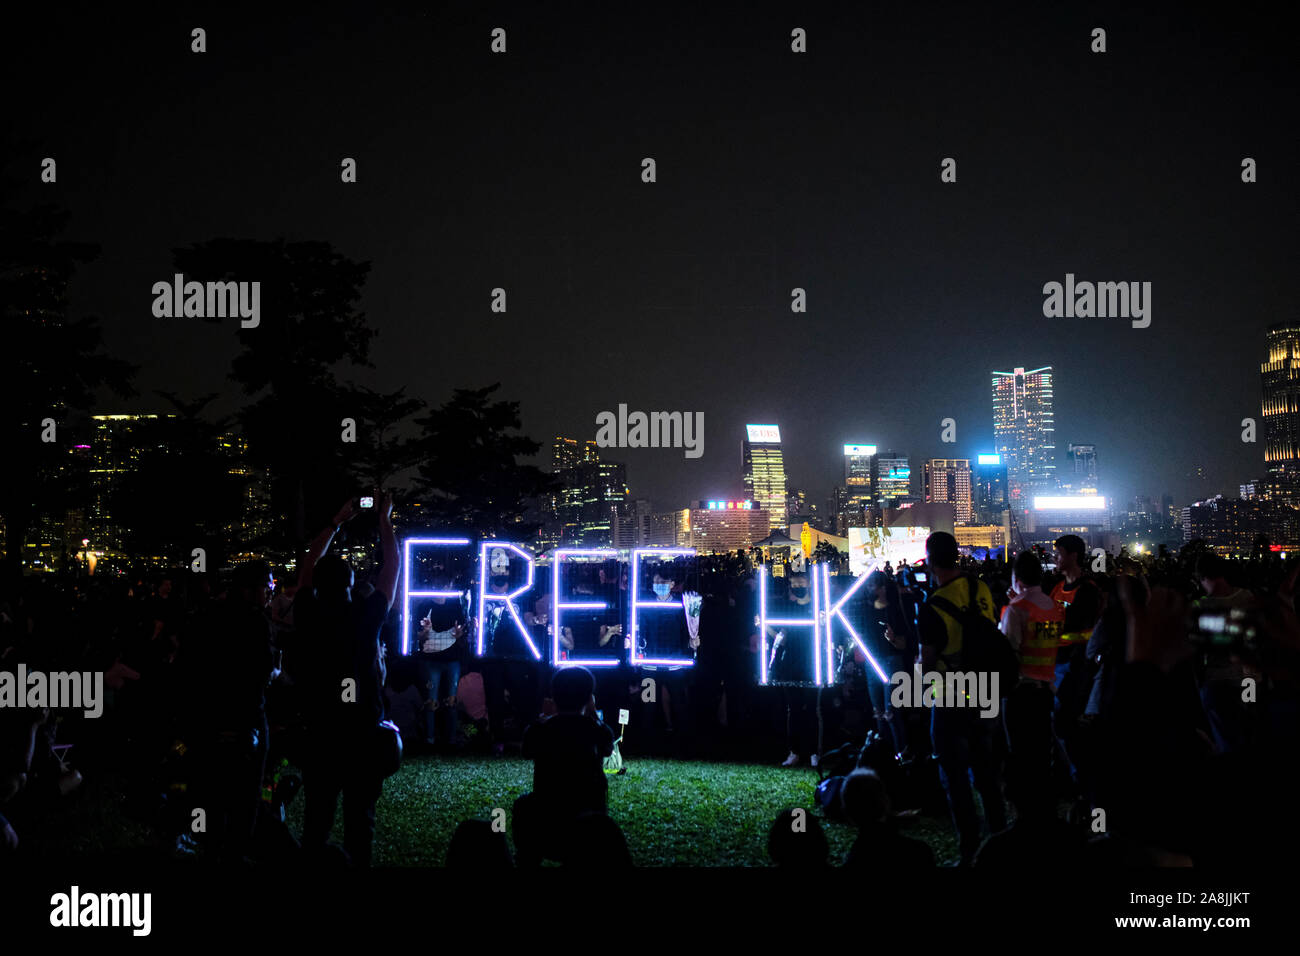 A Free HK sign during the rally.Memorial rally at Tamar Park in Hong Kong to mourn the death of a 22 years old university student, Alex Chow Tsz Lok who died from a serious brain injury during a fall on November 4th as police skirmished with demonstrators last weekend. He was left in critical condition and died after suffering a cardiac arrest. Stock Photo